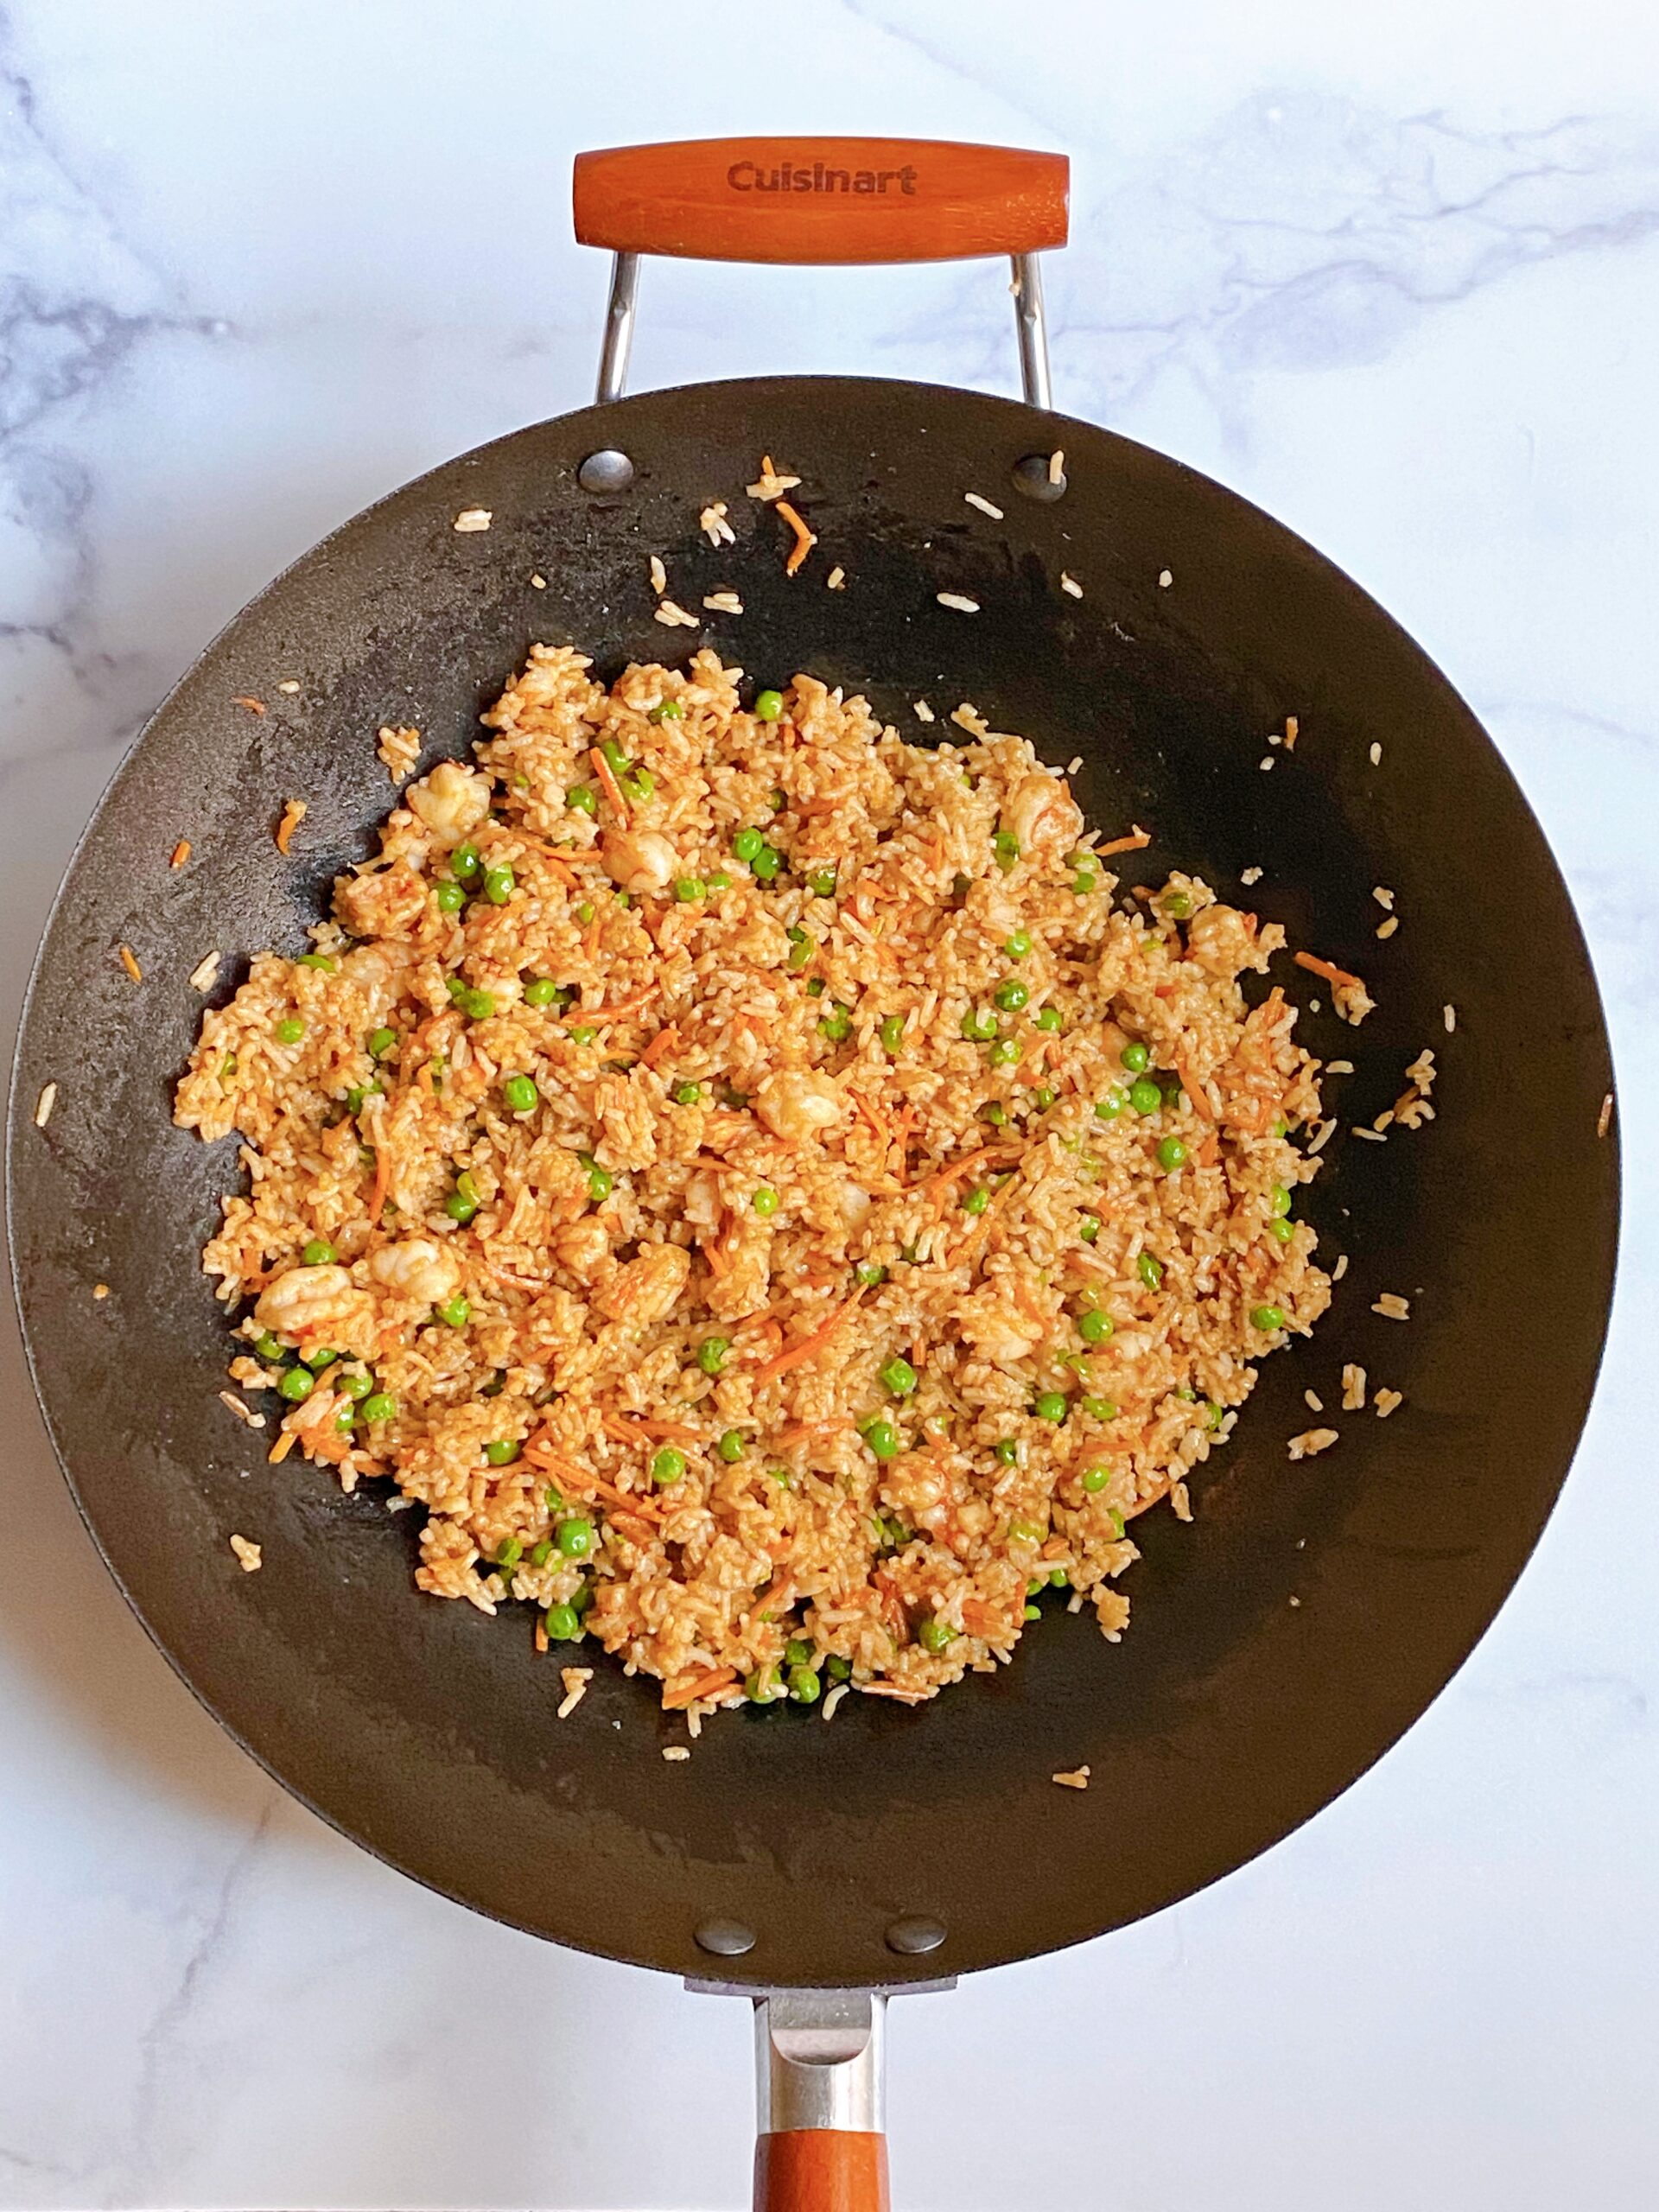 Overhead view of a wok filled with shrimp fried rice